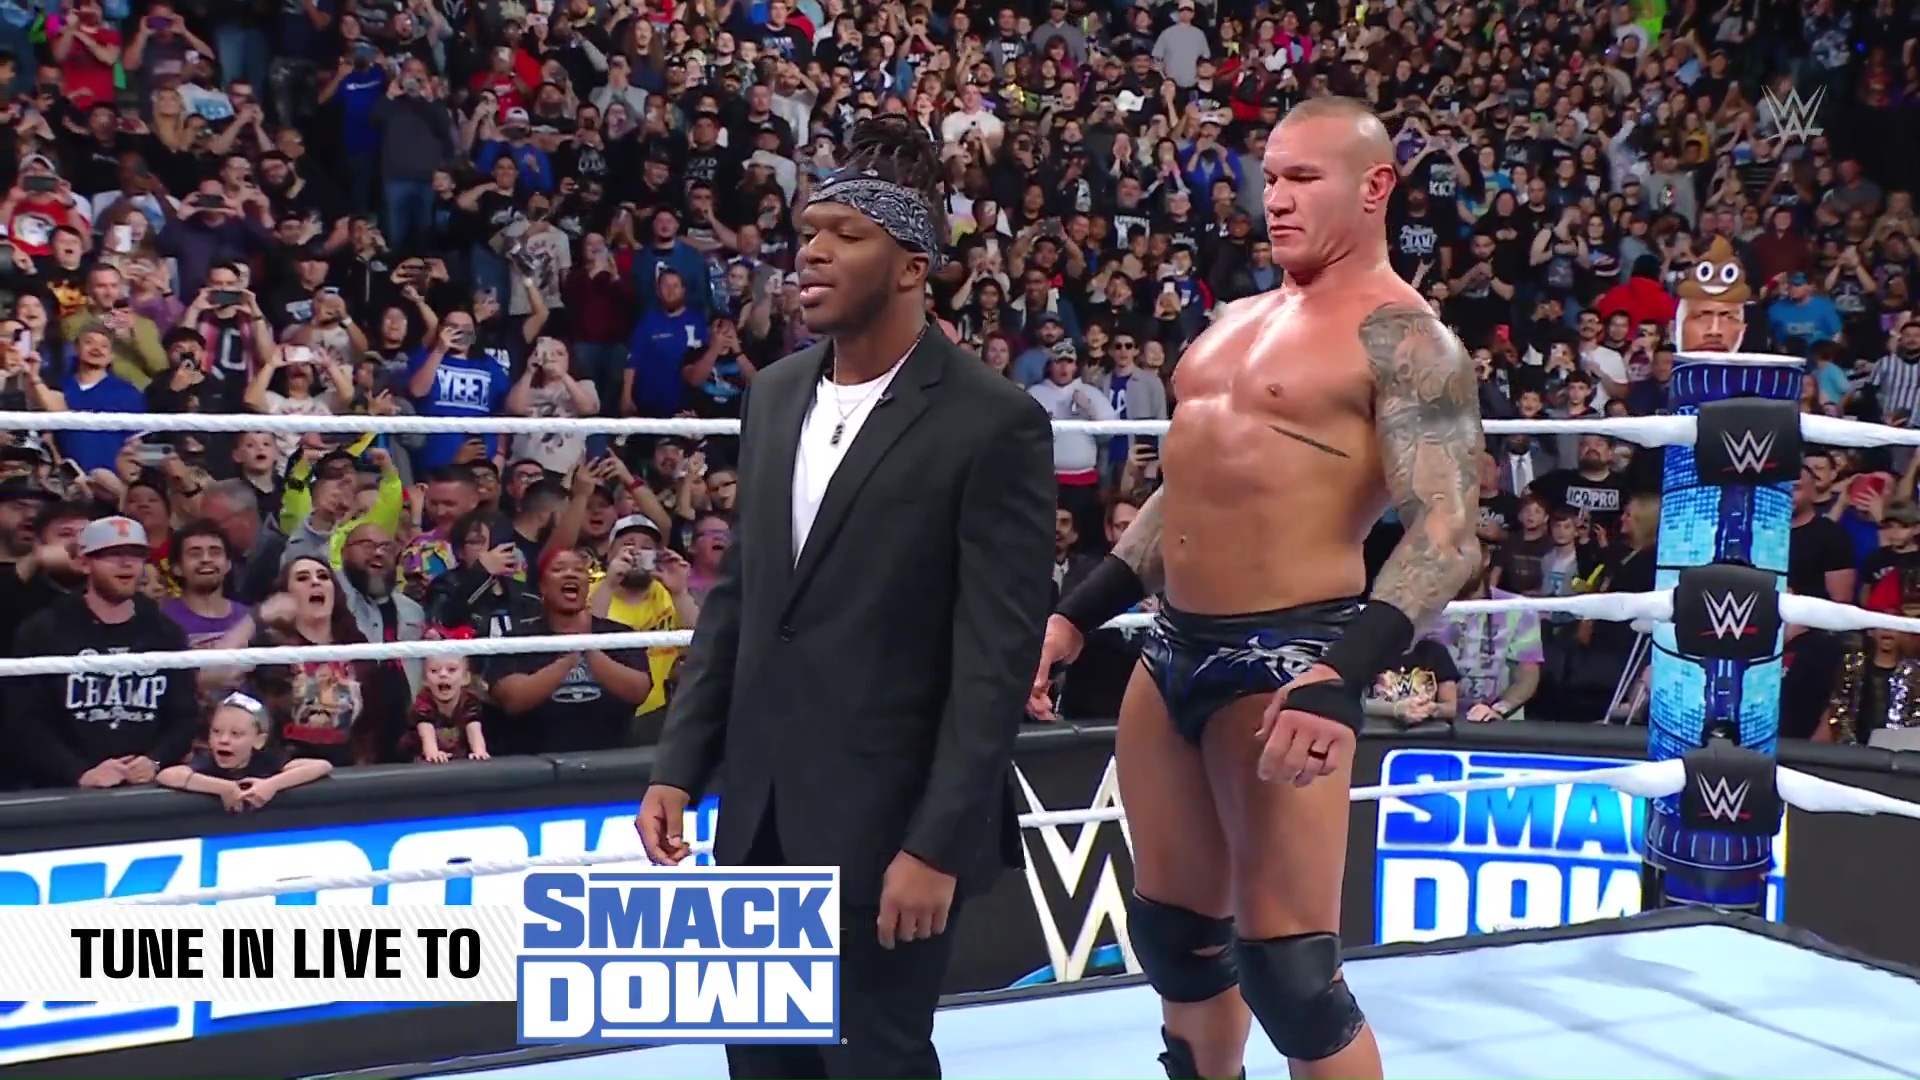 Randy Orton interrupted Paul and KSI's WWE announcement